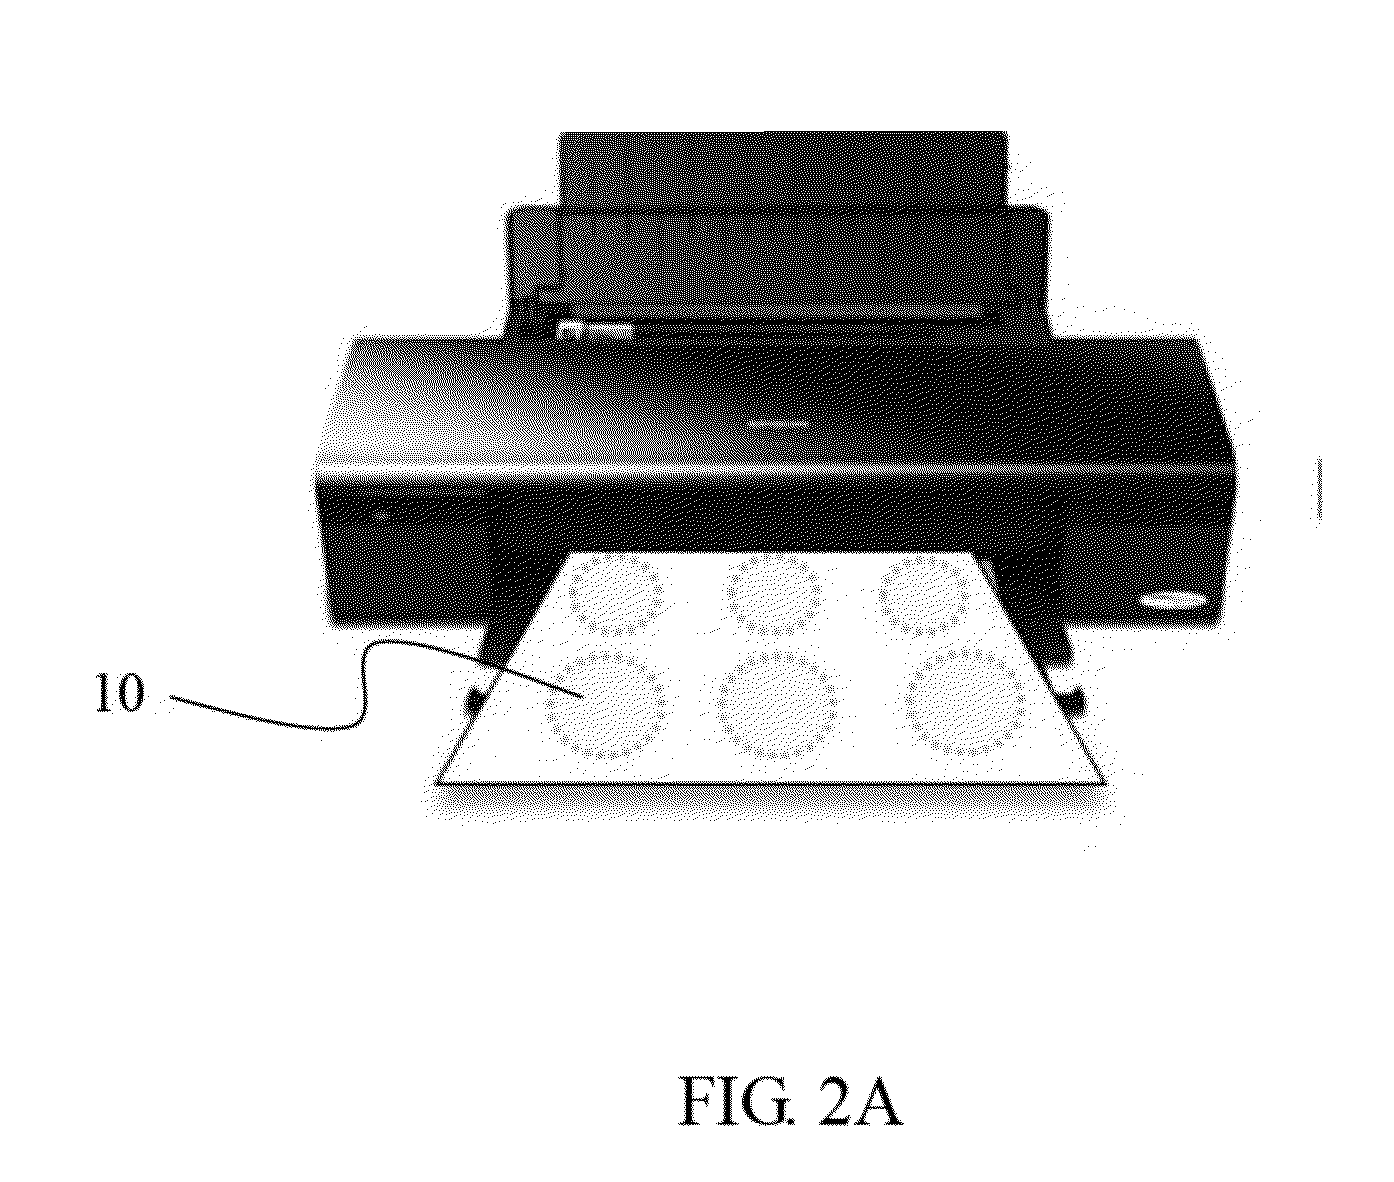 Method for Manufacturing and Using a Test Paper and Chemical Composition Thereof